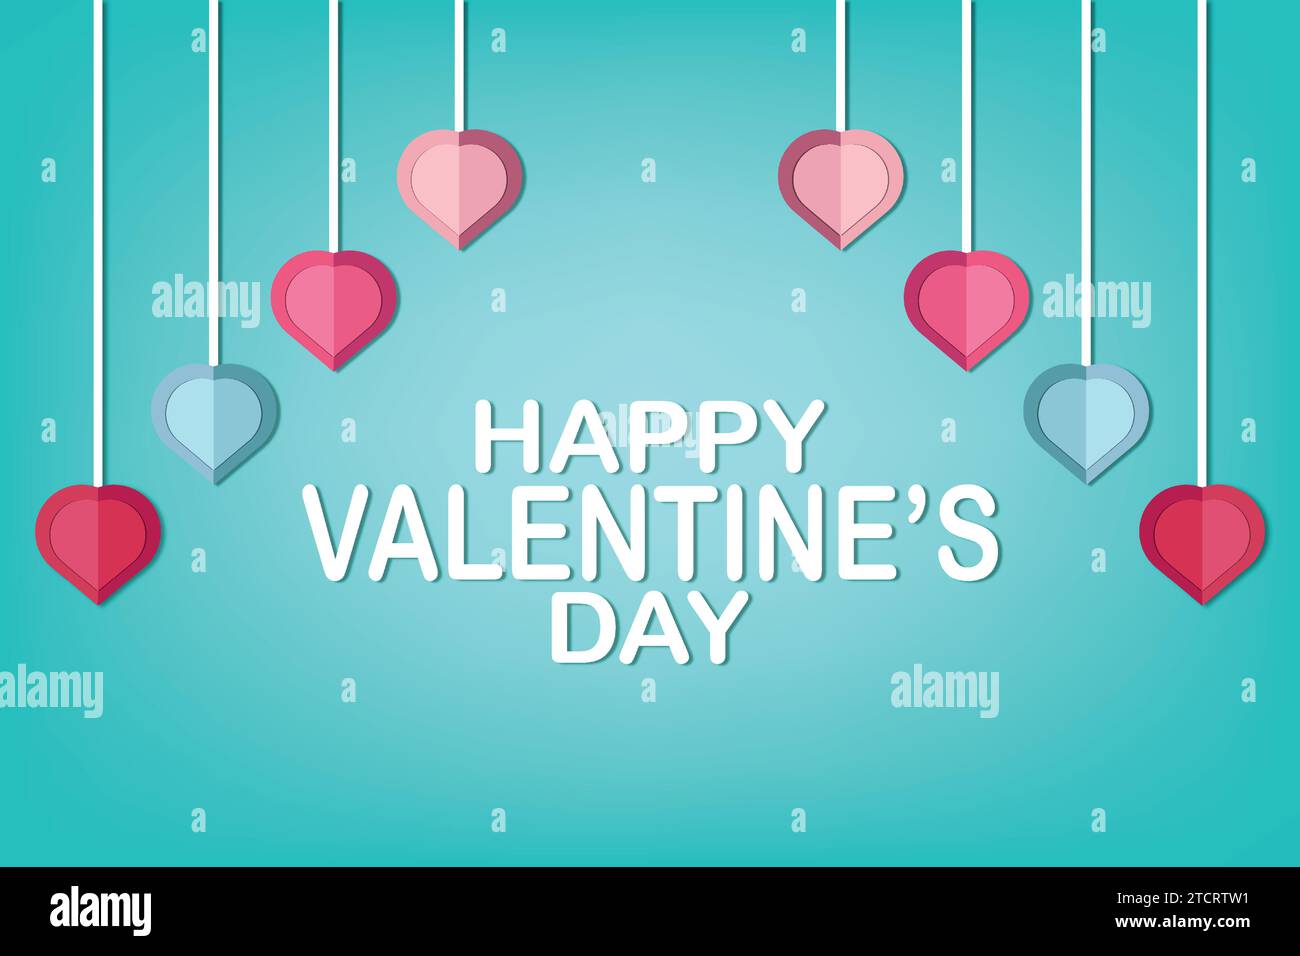 Valentine's day background with hearts and text. Promotion and shopping template or background for Love and Valentine's day concept. Vector Stock Vector